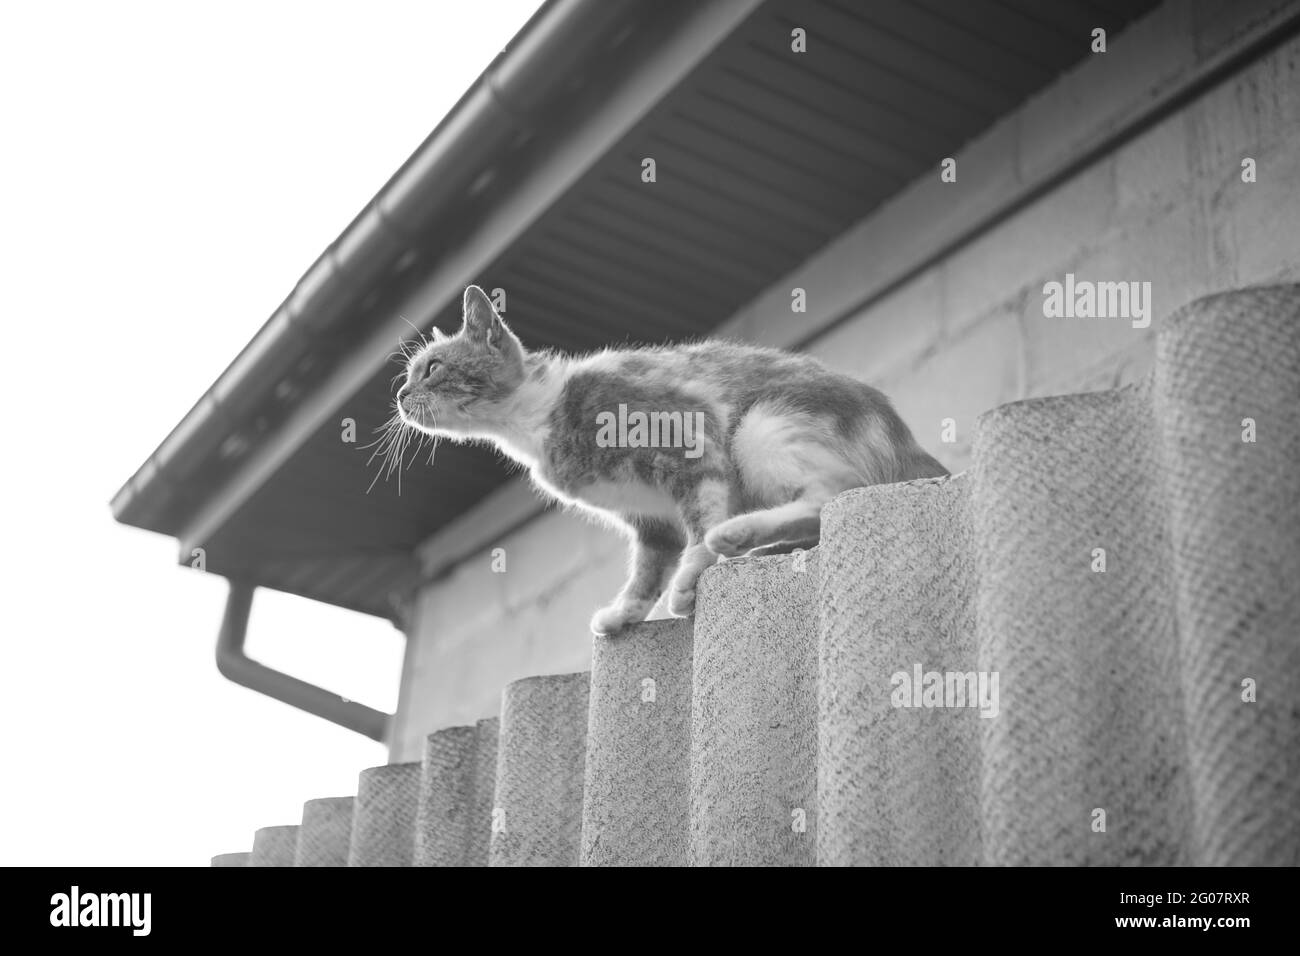 The cat is ready to jump from the rural fence to the roof. Stock Photo